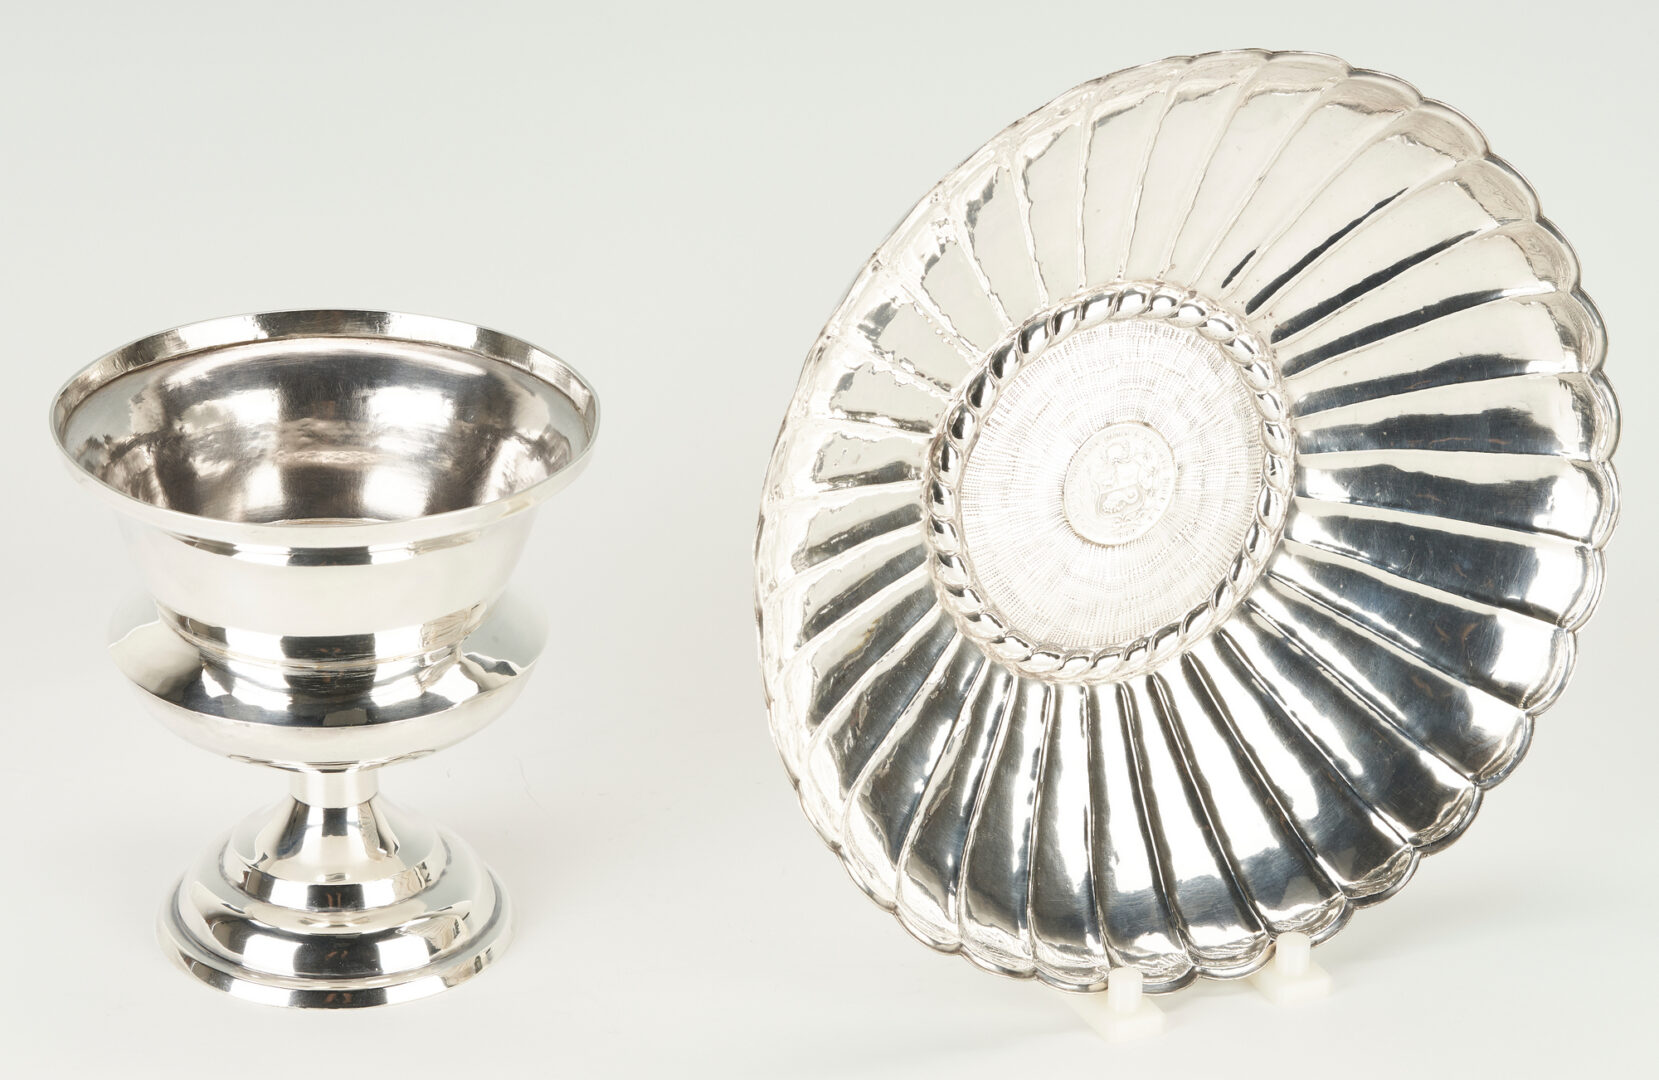 Lot 1126: Sanborn Mexican Sterling Silver Urn & Peruvian Sterling Silver Bowl w/ Inset 1869 Coin, 2 items